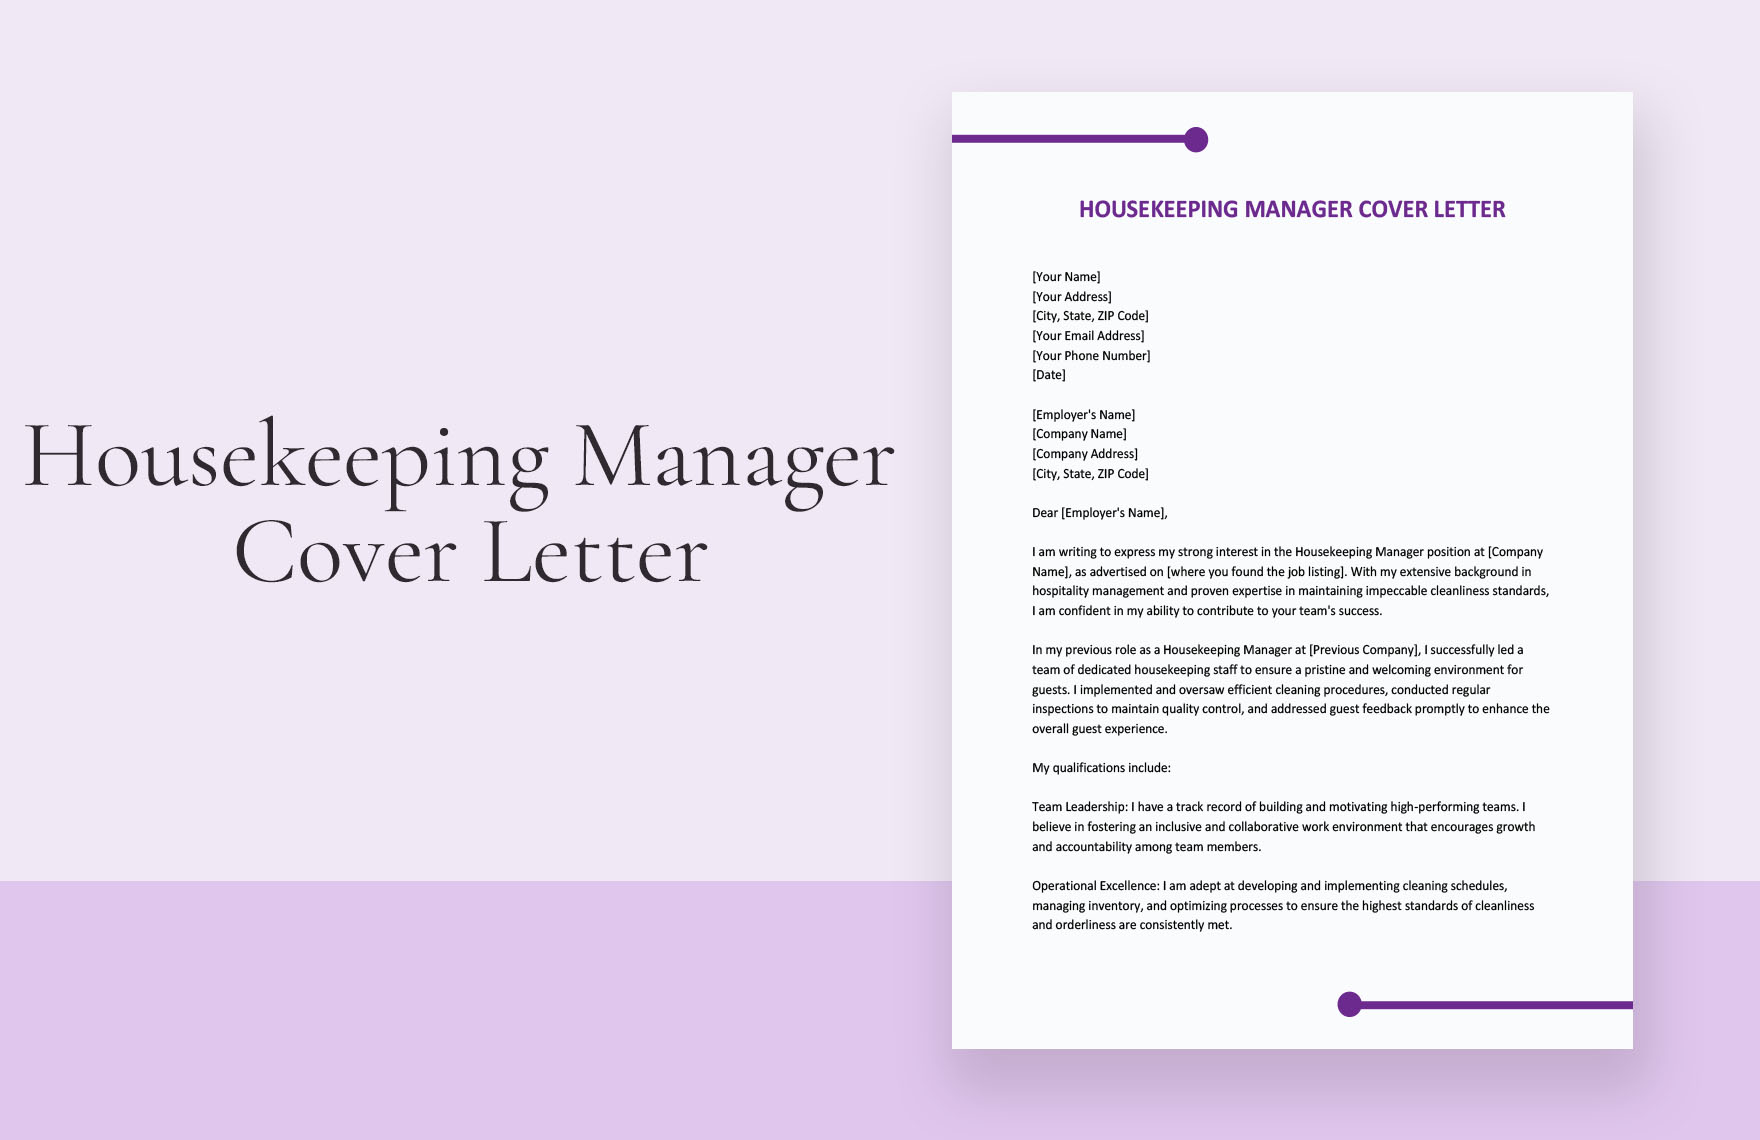 Housekeeping Manager Cover Letter in Word, Google Docs